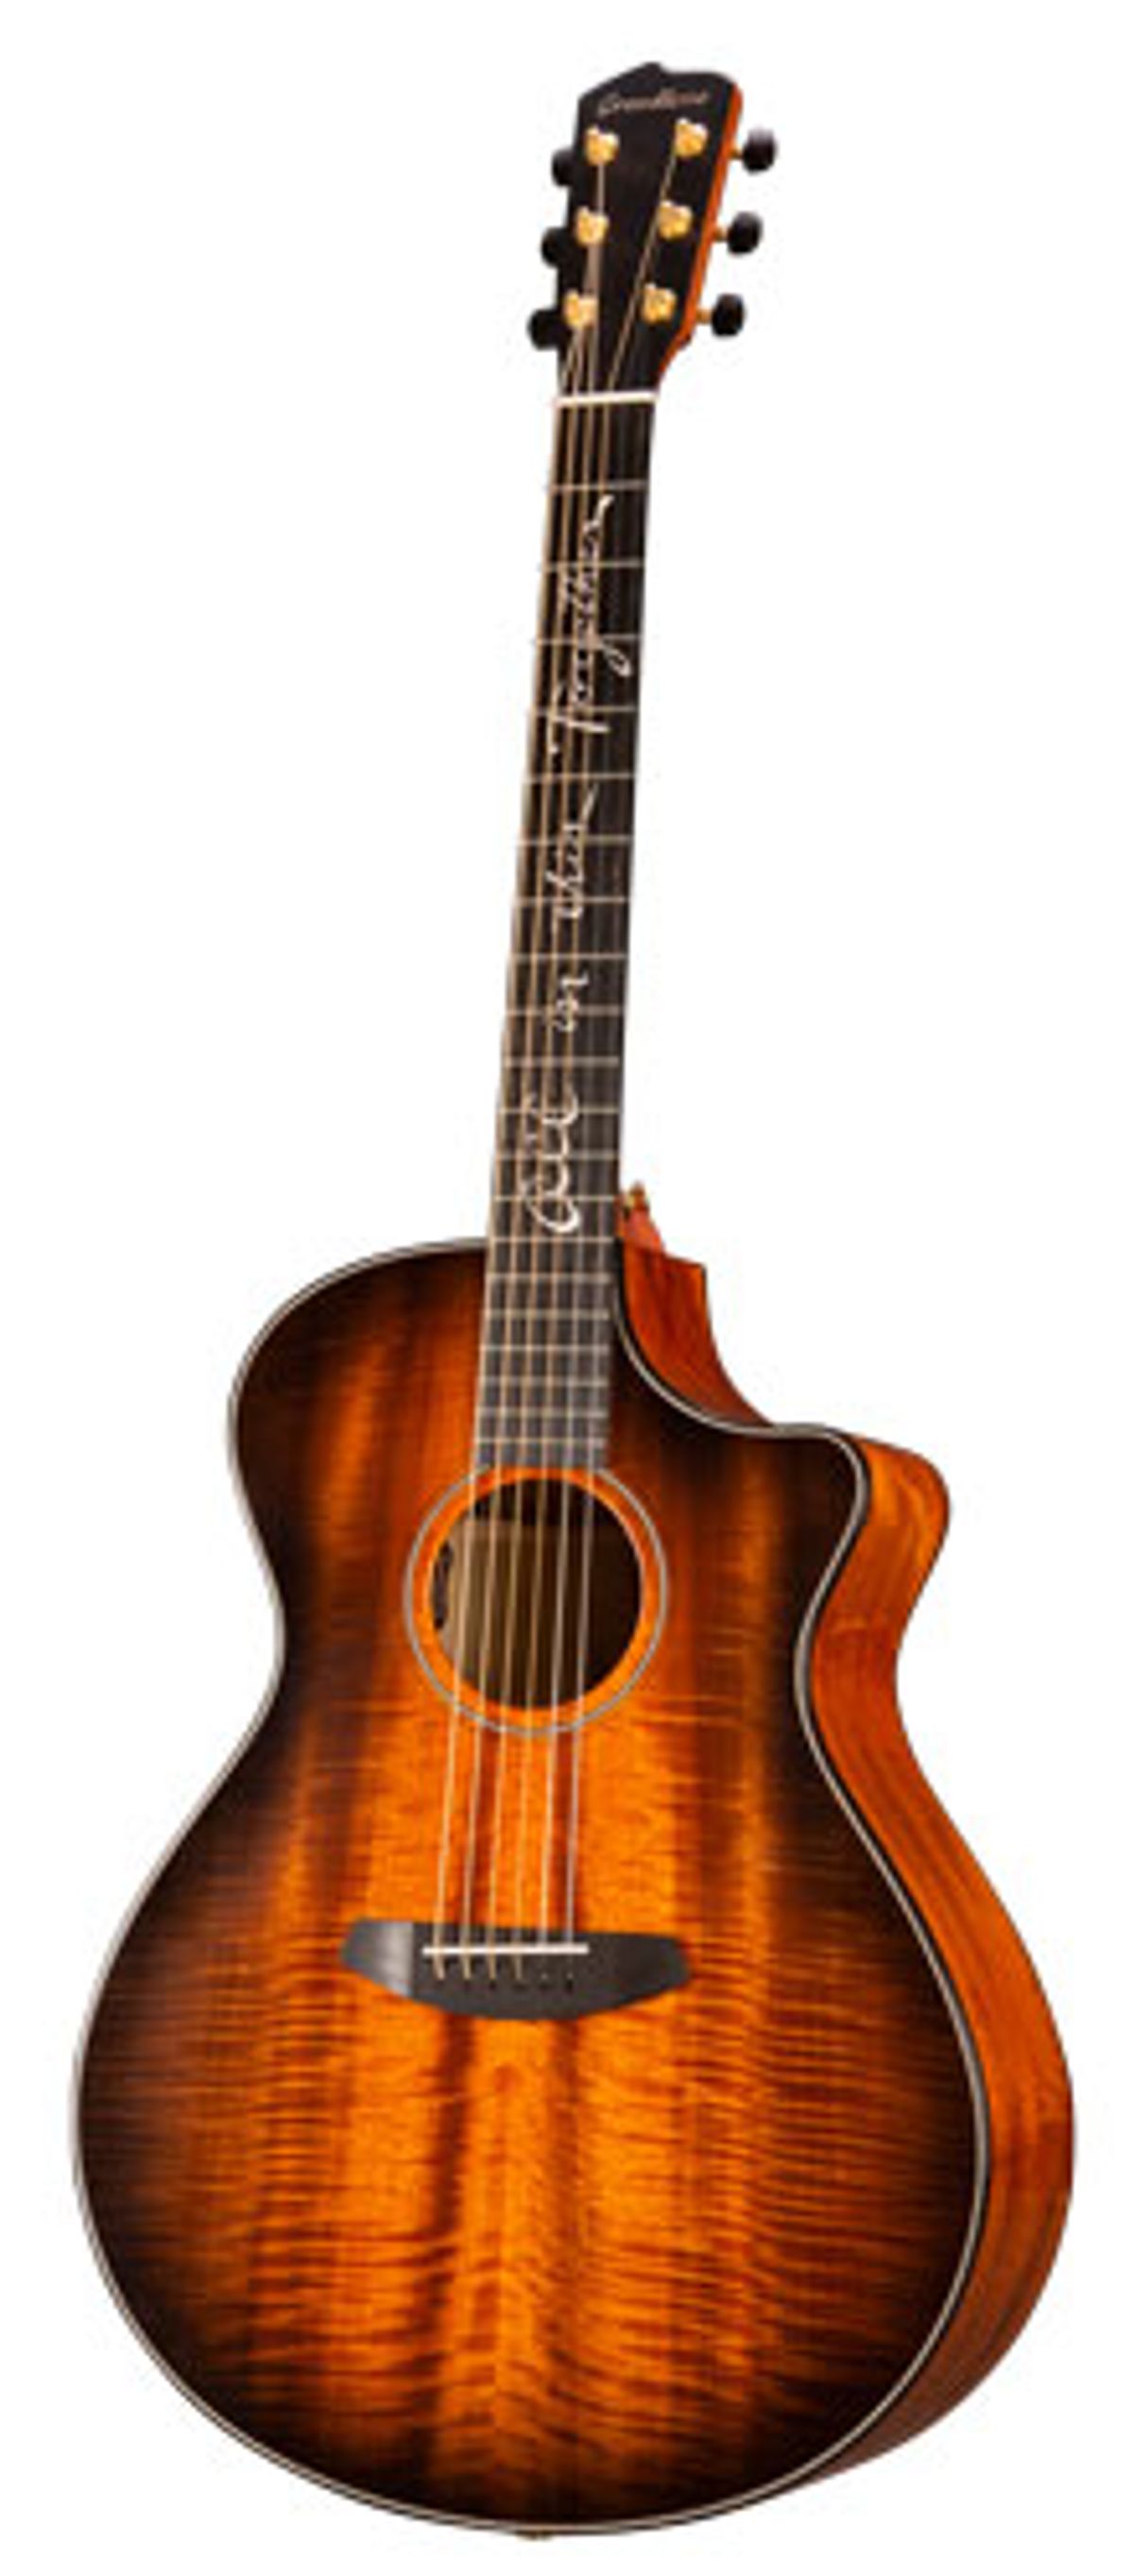 Breedlove and Jeff Bridges Announce Two New Sustainably Sourced Signature Model Guitars